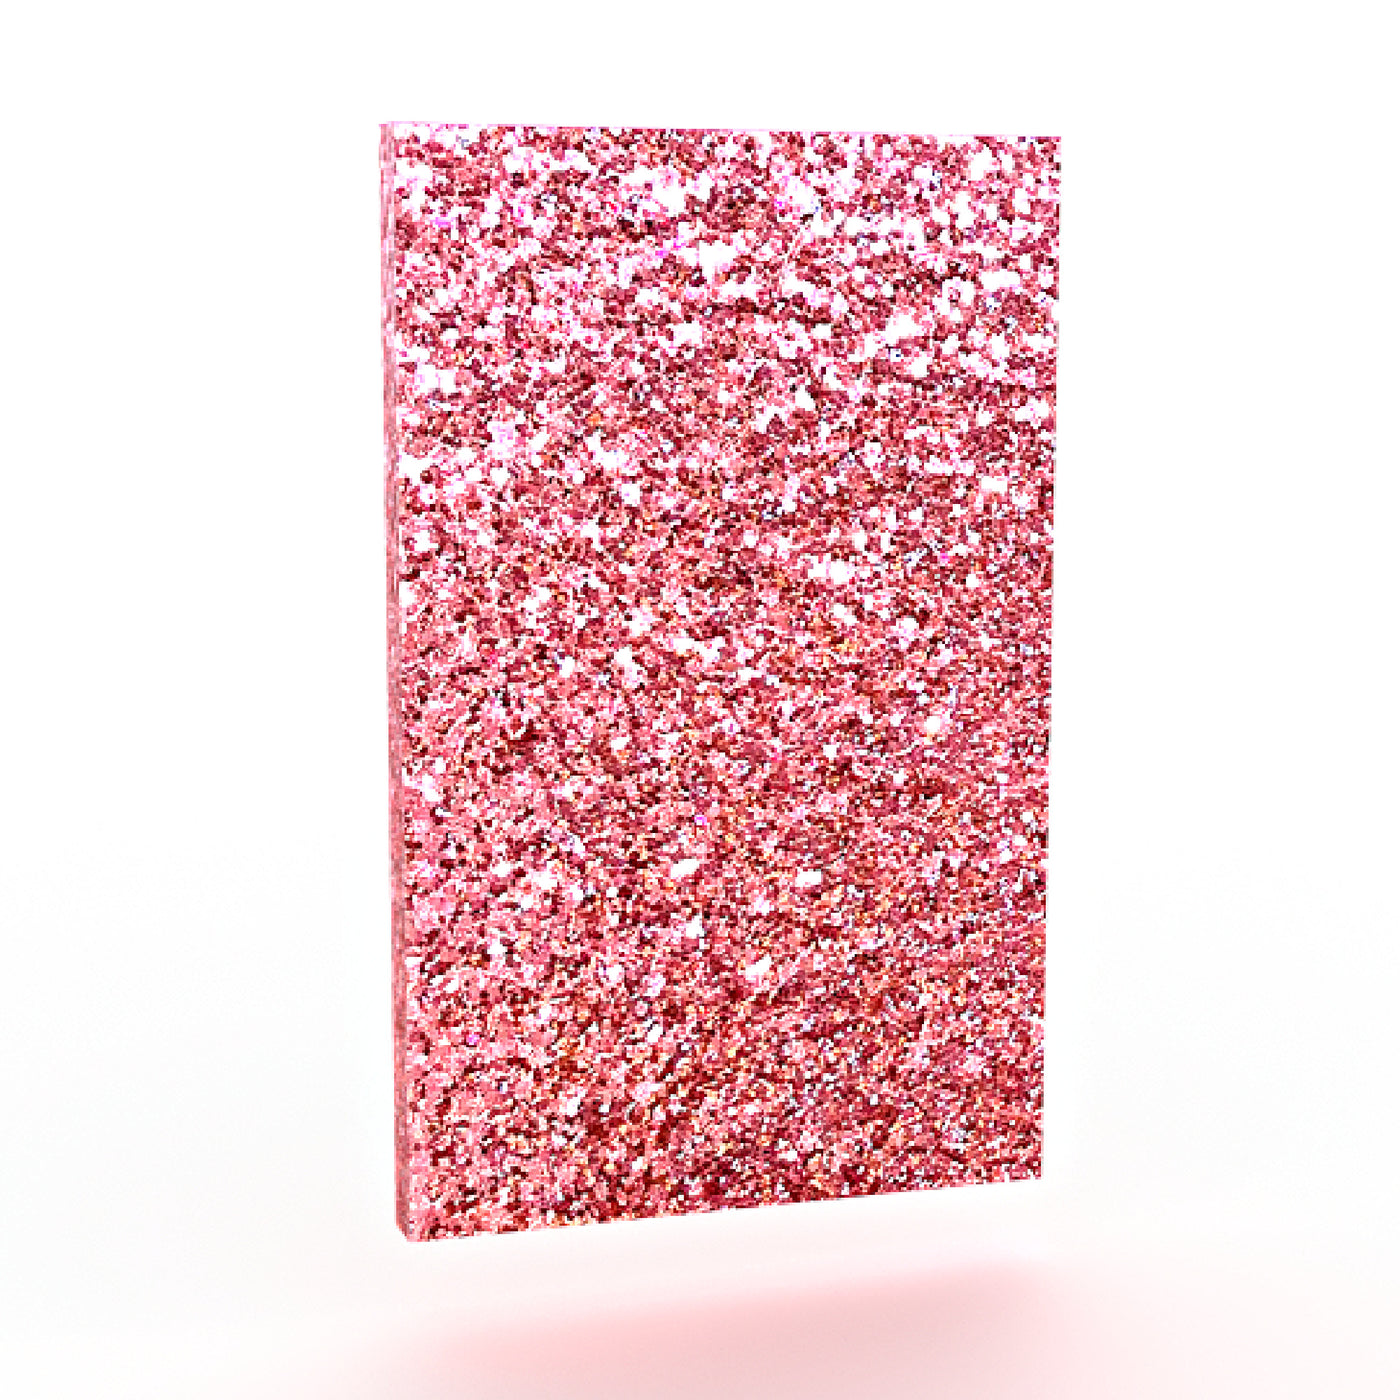 3mm cast acrylic sheet for laser cutting pink glitter plexiglass color rose gold best custom made design for your laser machine unique acrylique for sale near me